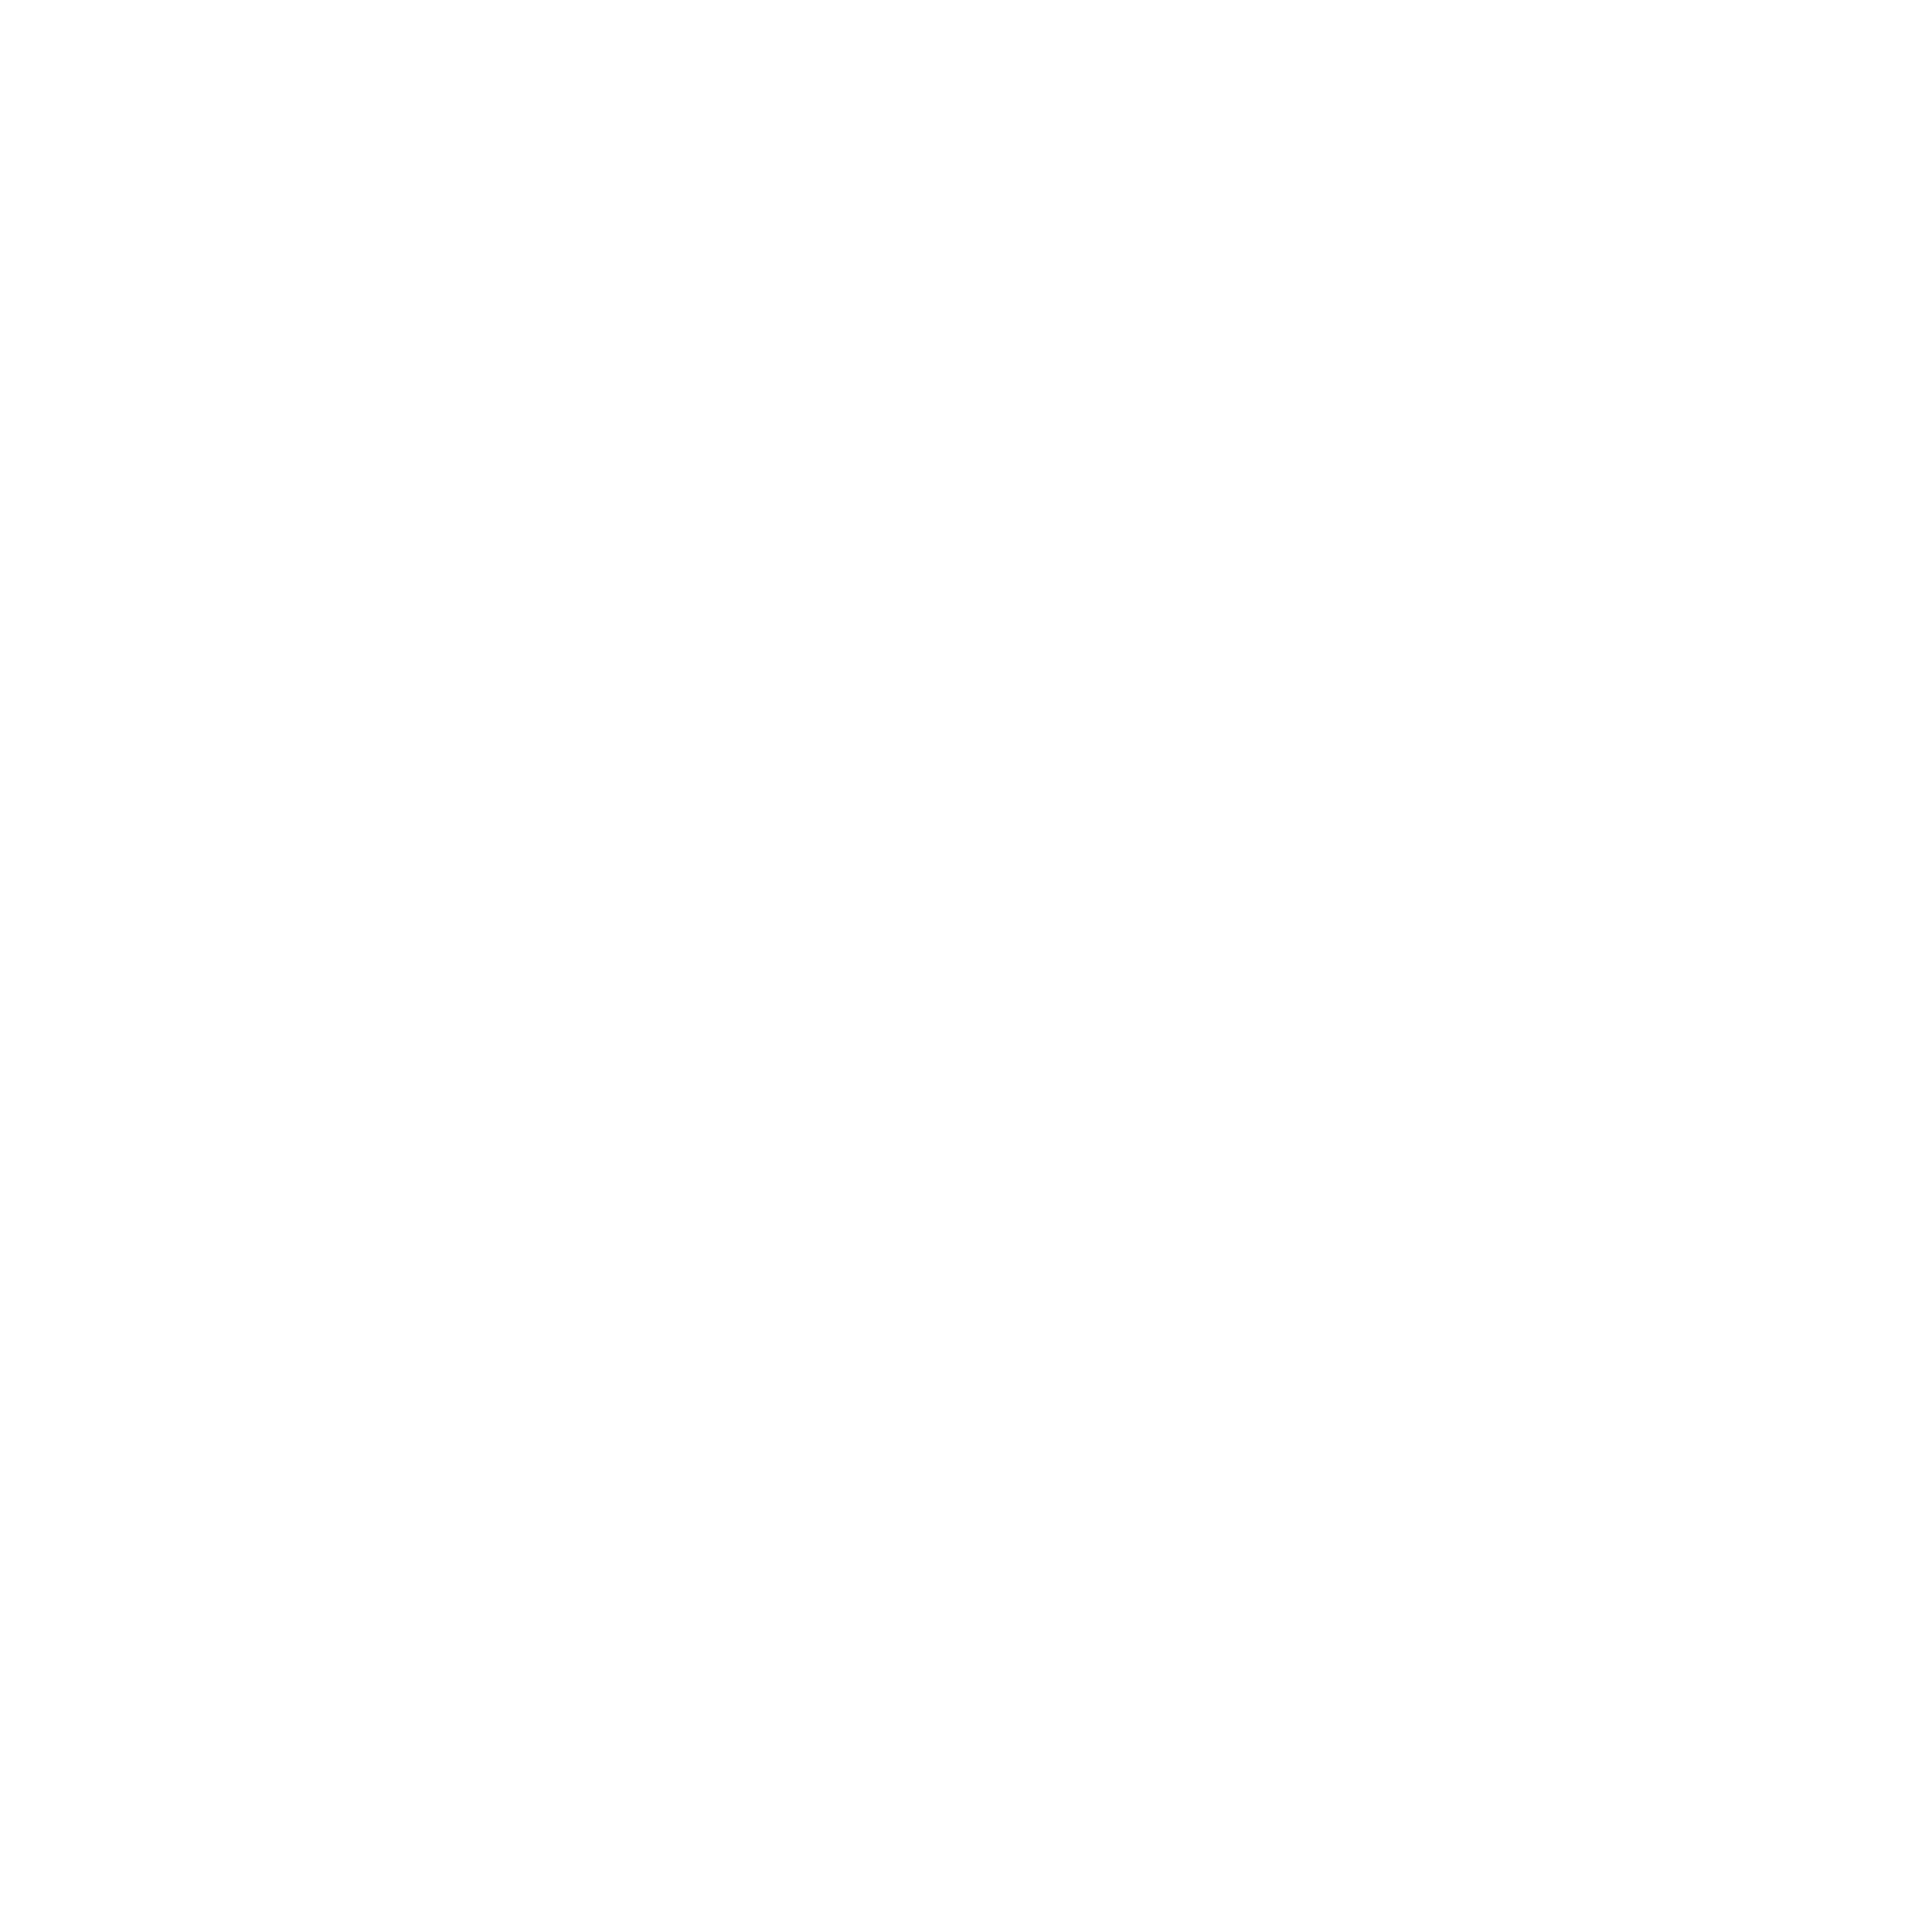 At the heart of the HOOC solution